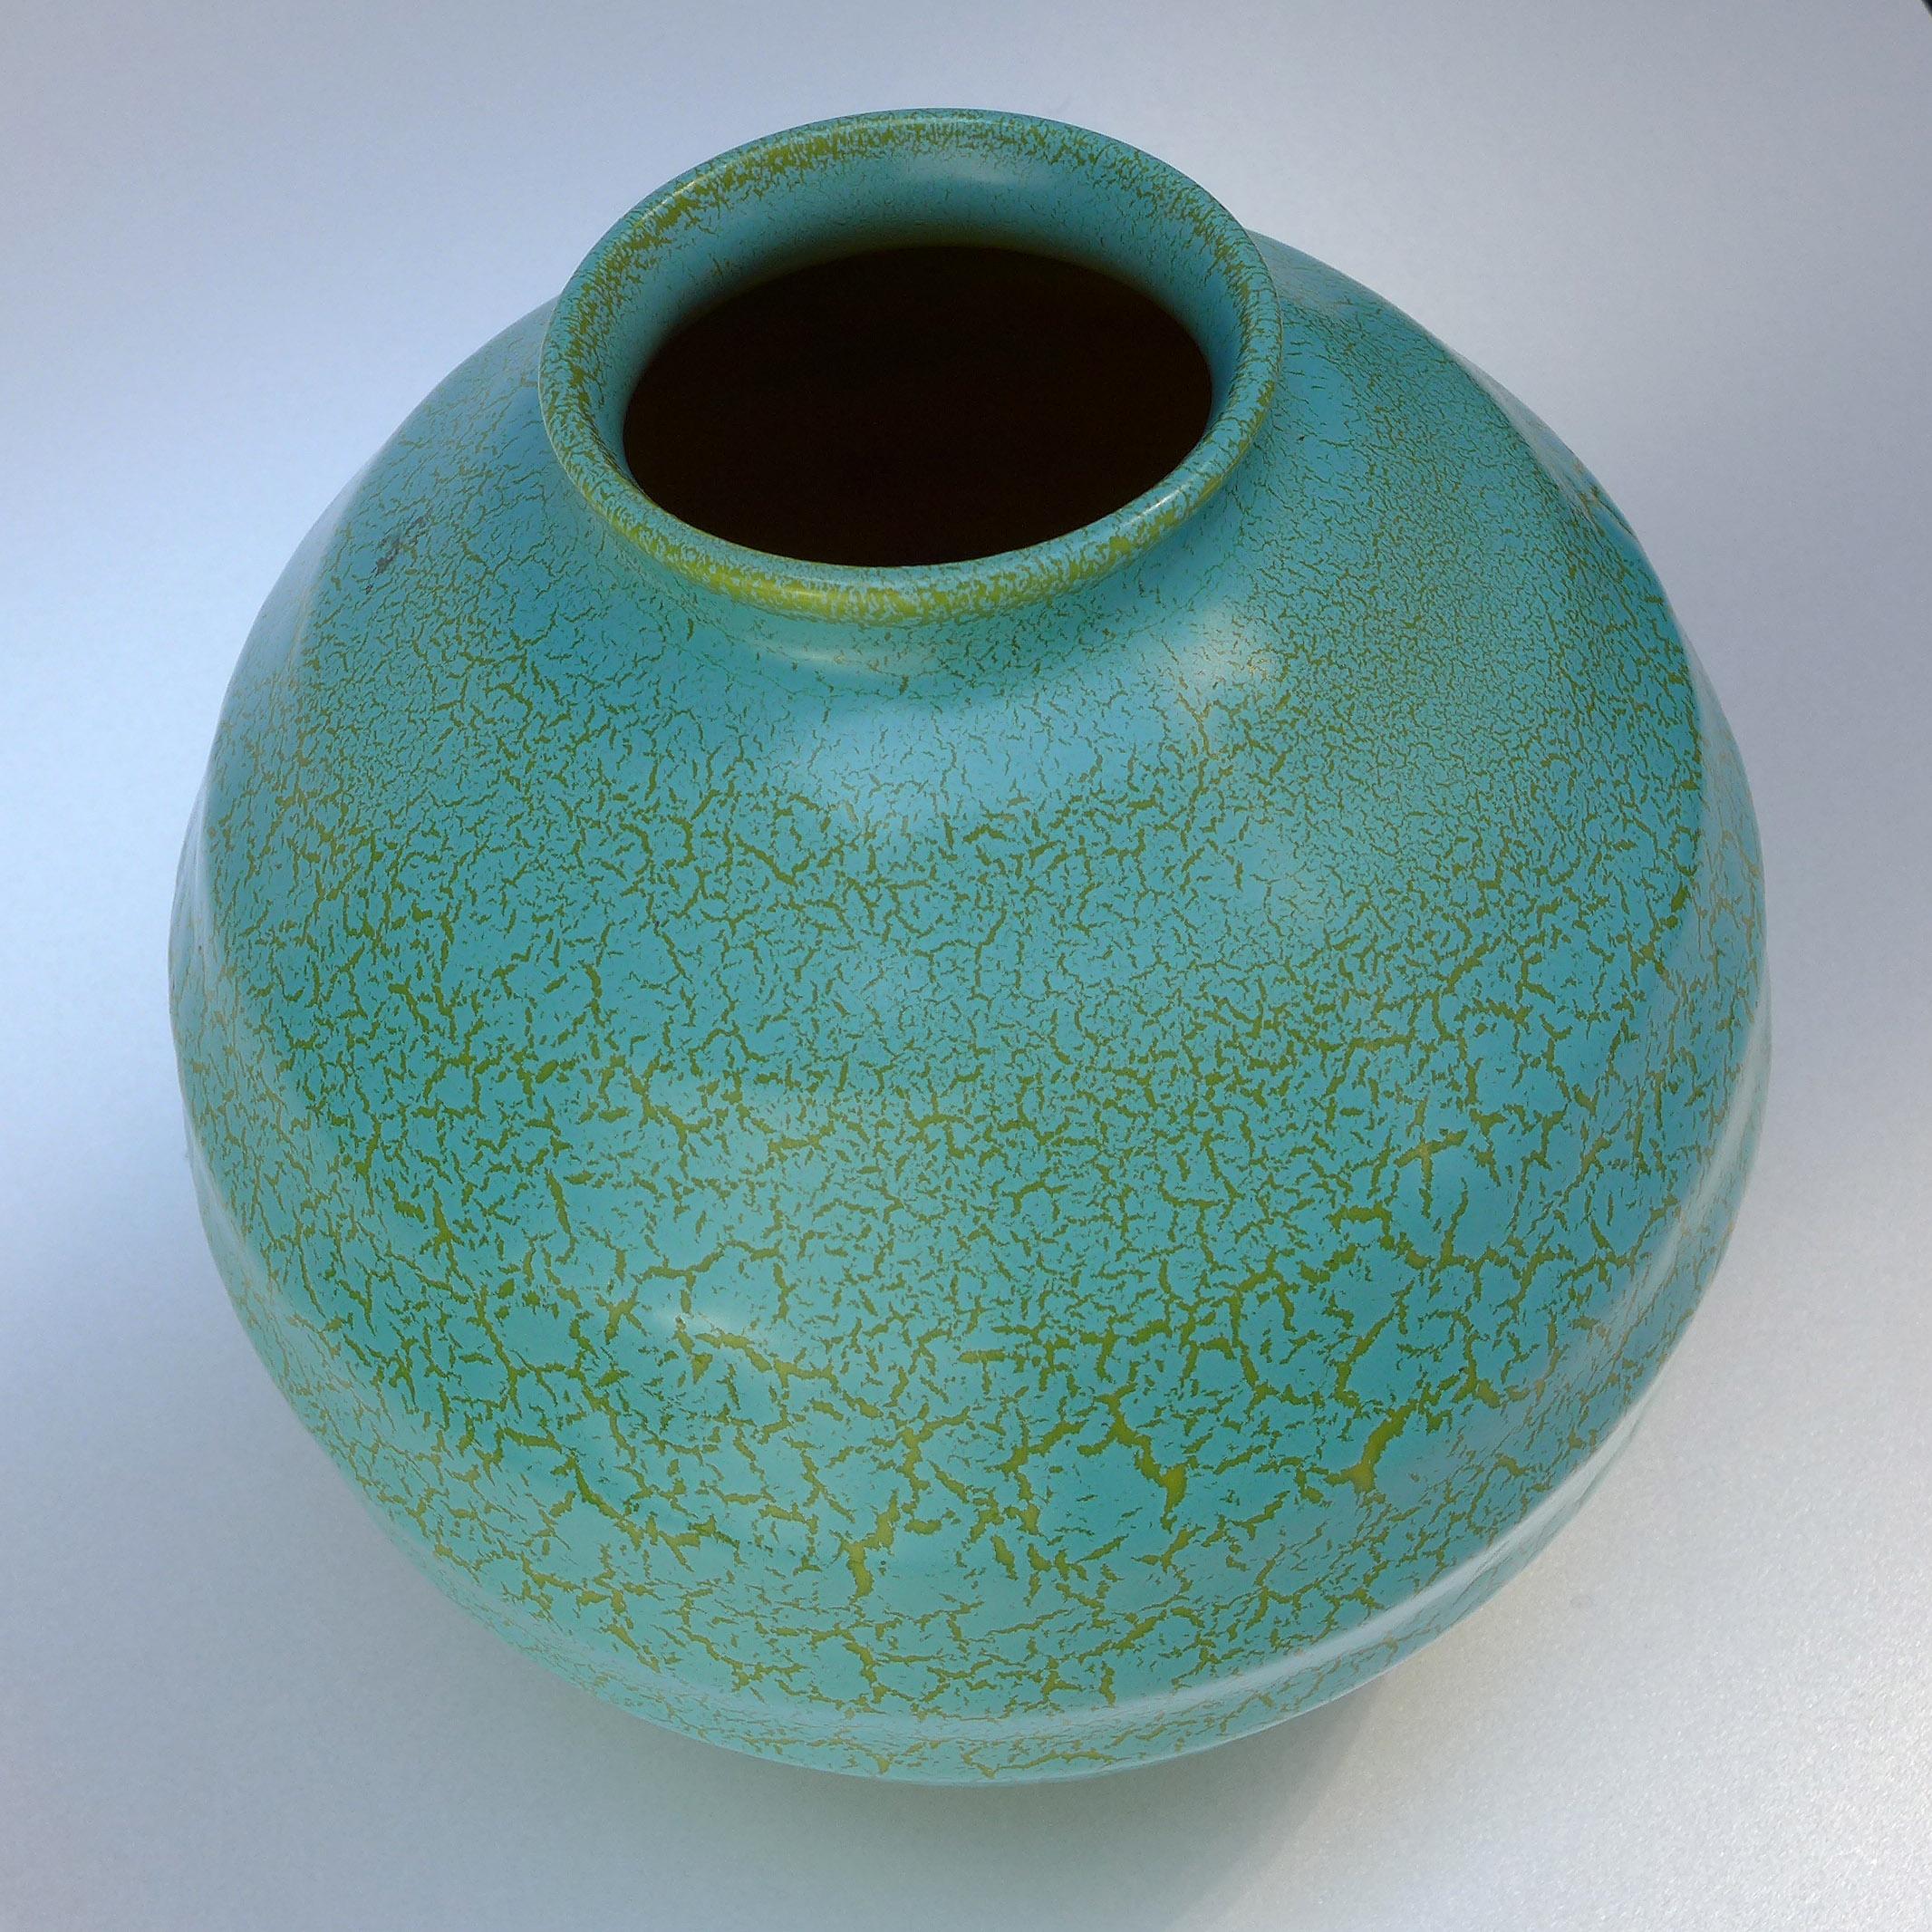 Ribbed ball vase with turquoise and green crackle glaze by Dutch designer Frans van Katwijk (1893-1952), produced by Plateelbakkerij Schoonhoven, the Netherlands, circa 1935.
 